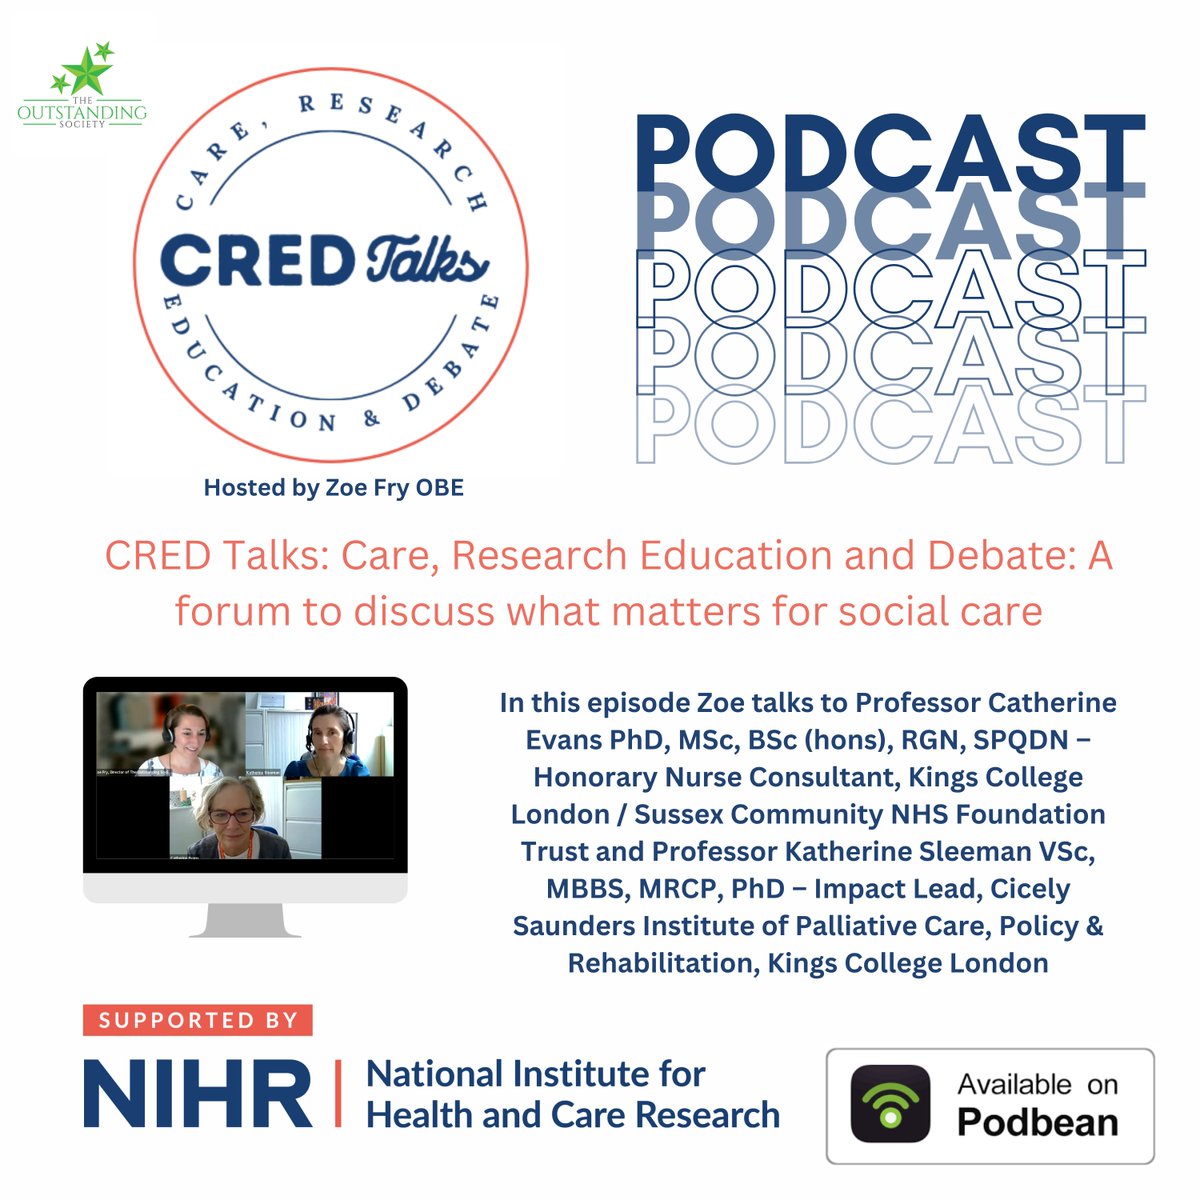 We are delighted to share the first of our CRED Talks Podcast supported by @NIHRresearch Joined by @kesleeman and @CatherineJanee1 who led the CovPall Care Homes Study Listen here: buff.ly/3wk8Ku1 #research #podcast #socialcare #palliativecare #carehomes